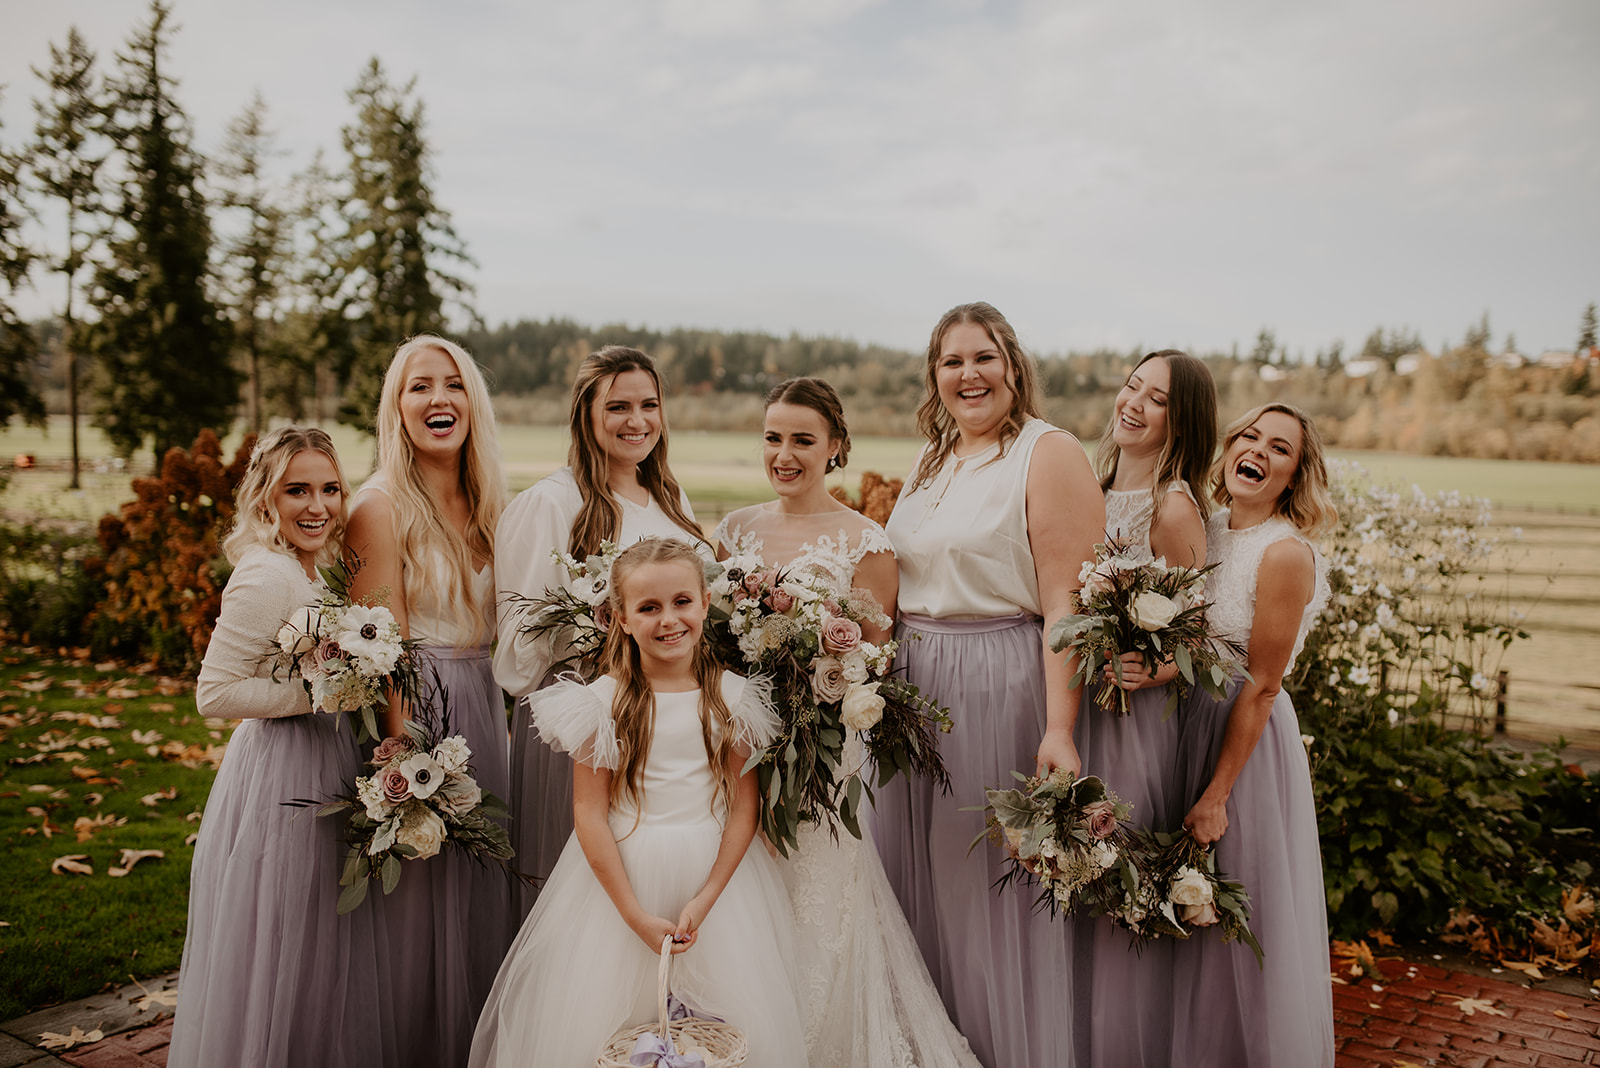 Bridesmaids and flower girl with bride